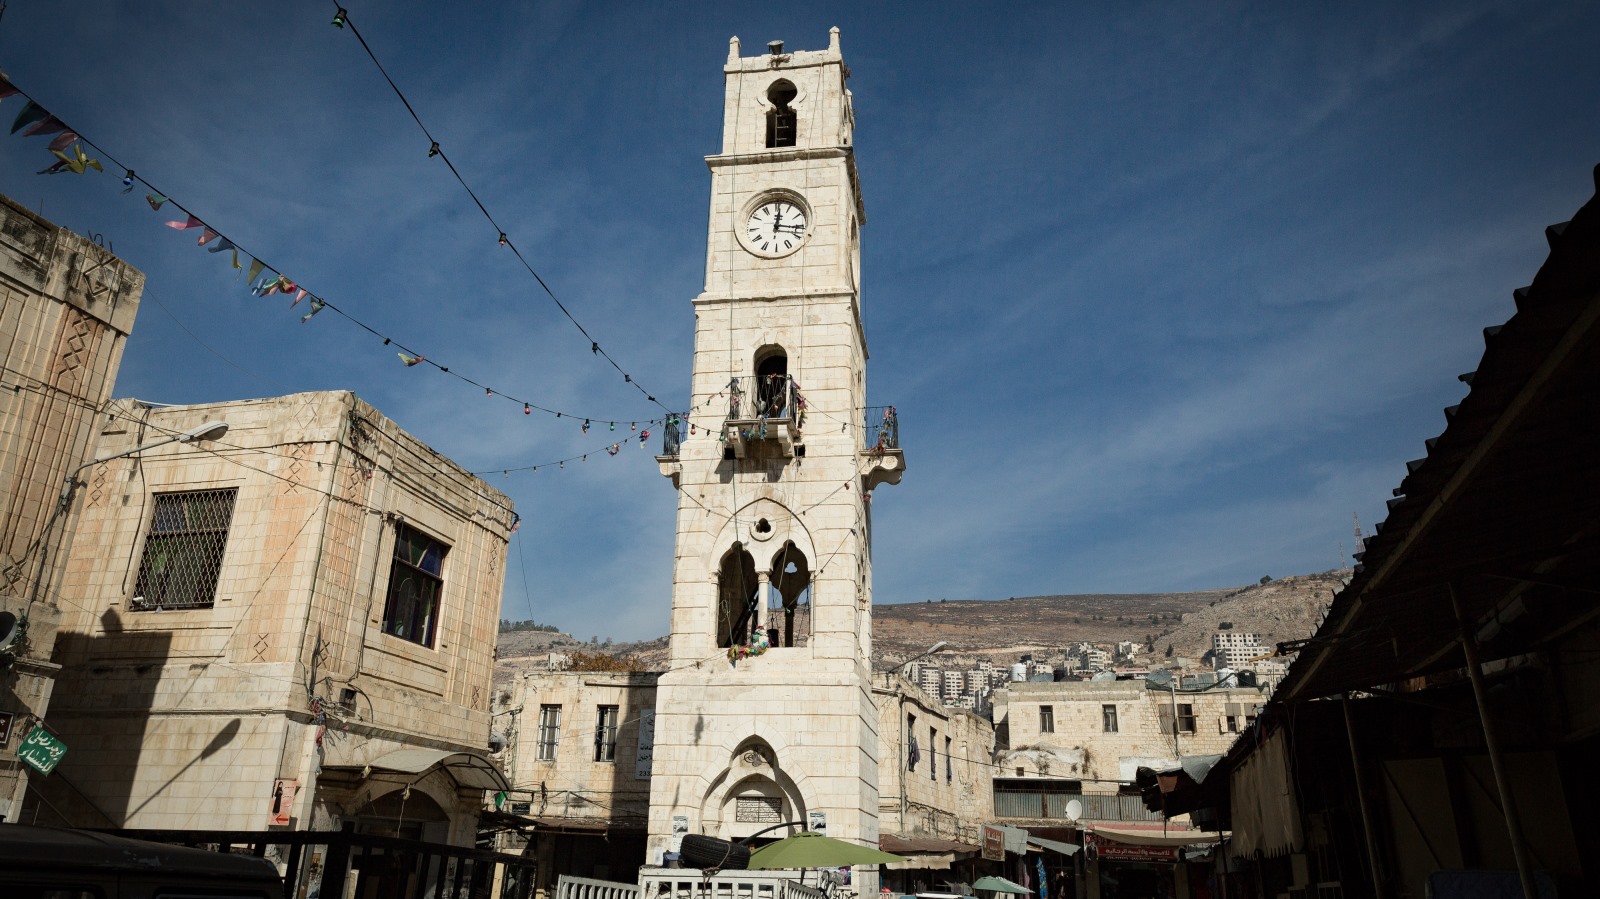 The al-Manara clock tower was built in 1906 in Nablus, now in the Palestinian Authority-administered territories. Photo by Sebi Berens/FLASH90